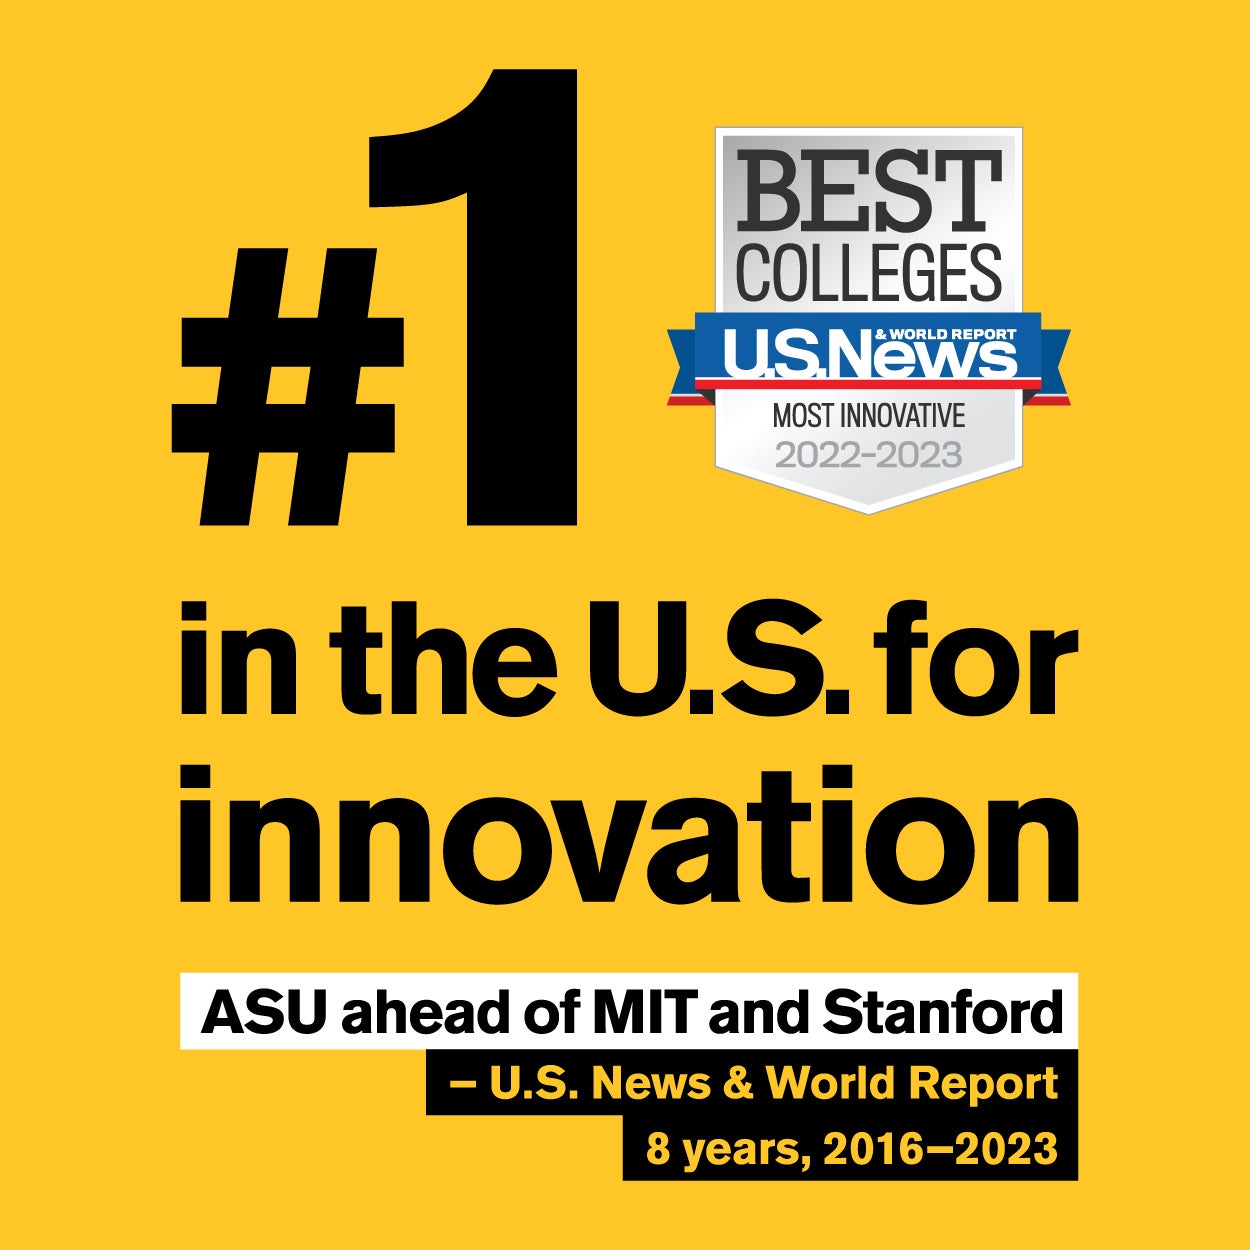 #1 in the U.S. for innovation 